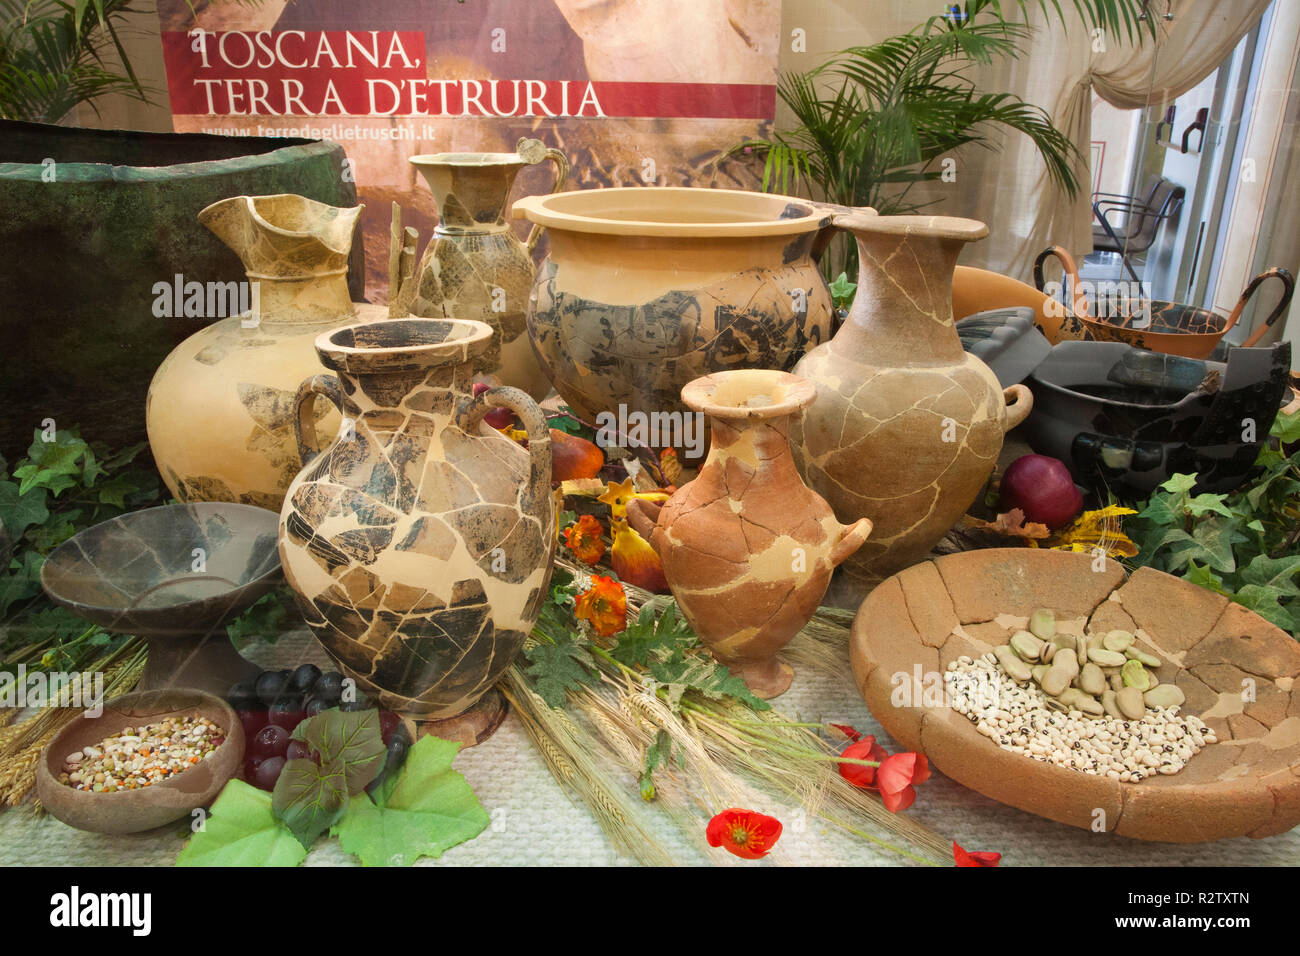 europe, italy, tuscany, vetulonia, archaeological museum, exibition, etruscan food, table laden with pots and utensils for banquet Stock Photo